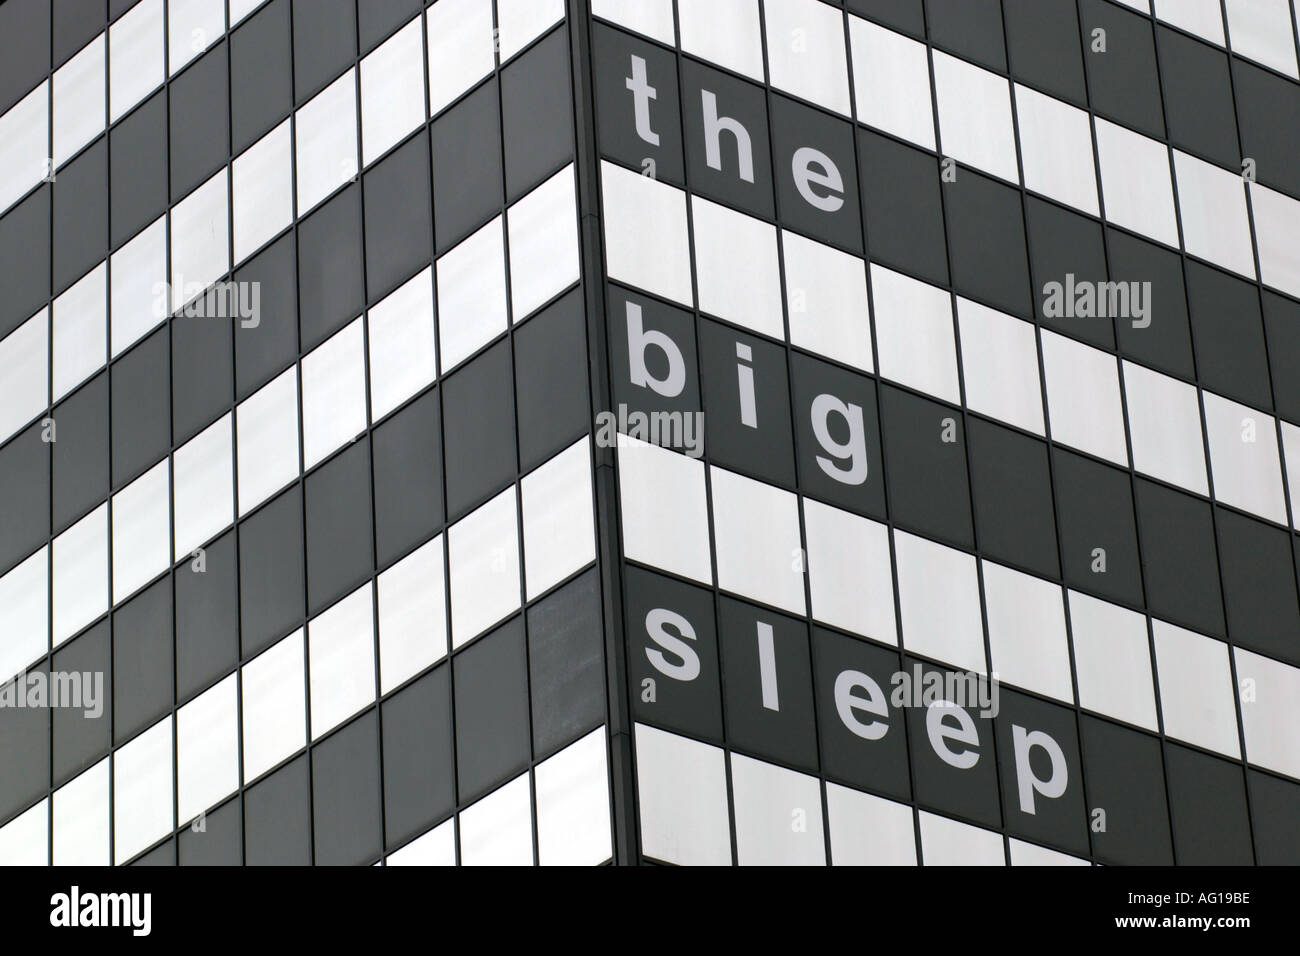 The Big Sleep Hotel Cardiff City Centre South Wales UK Foto Stock